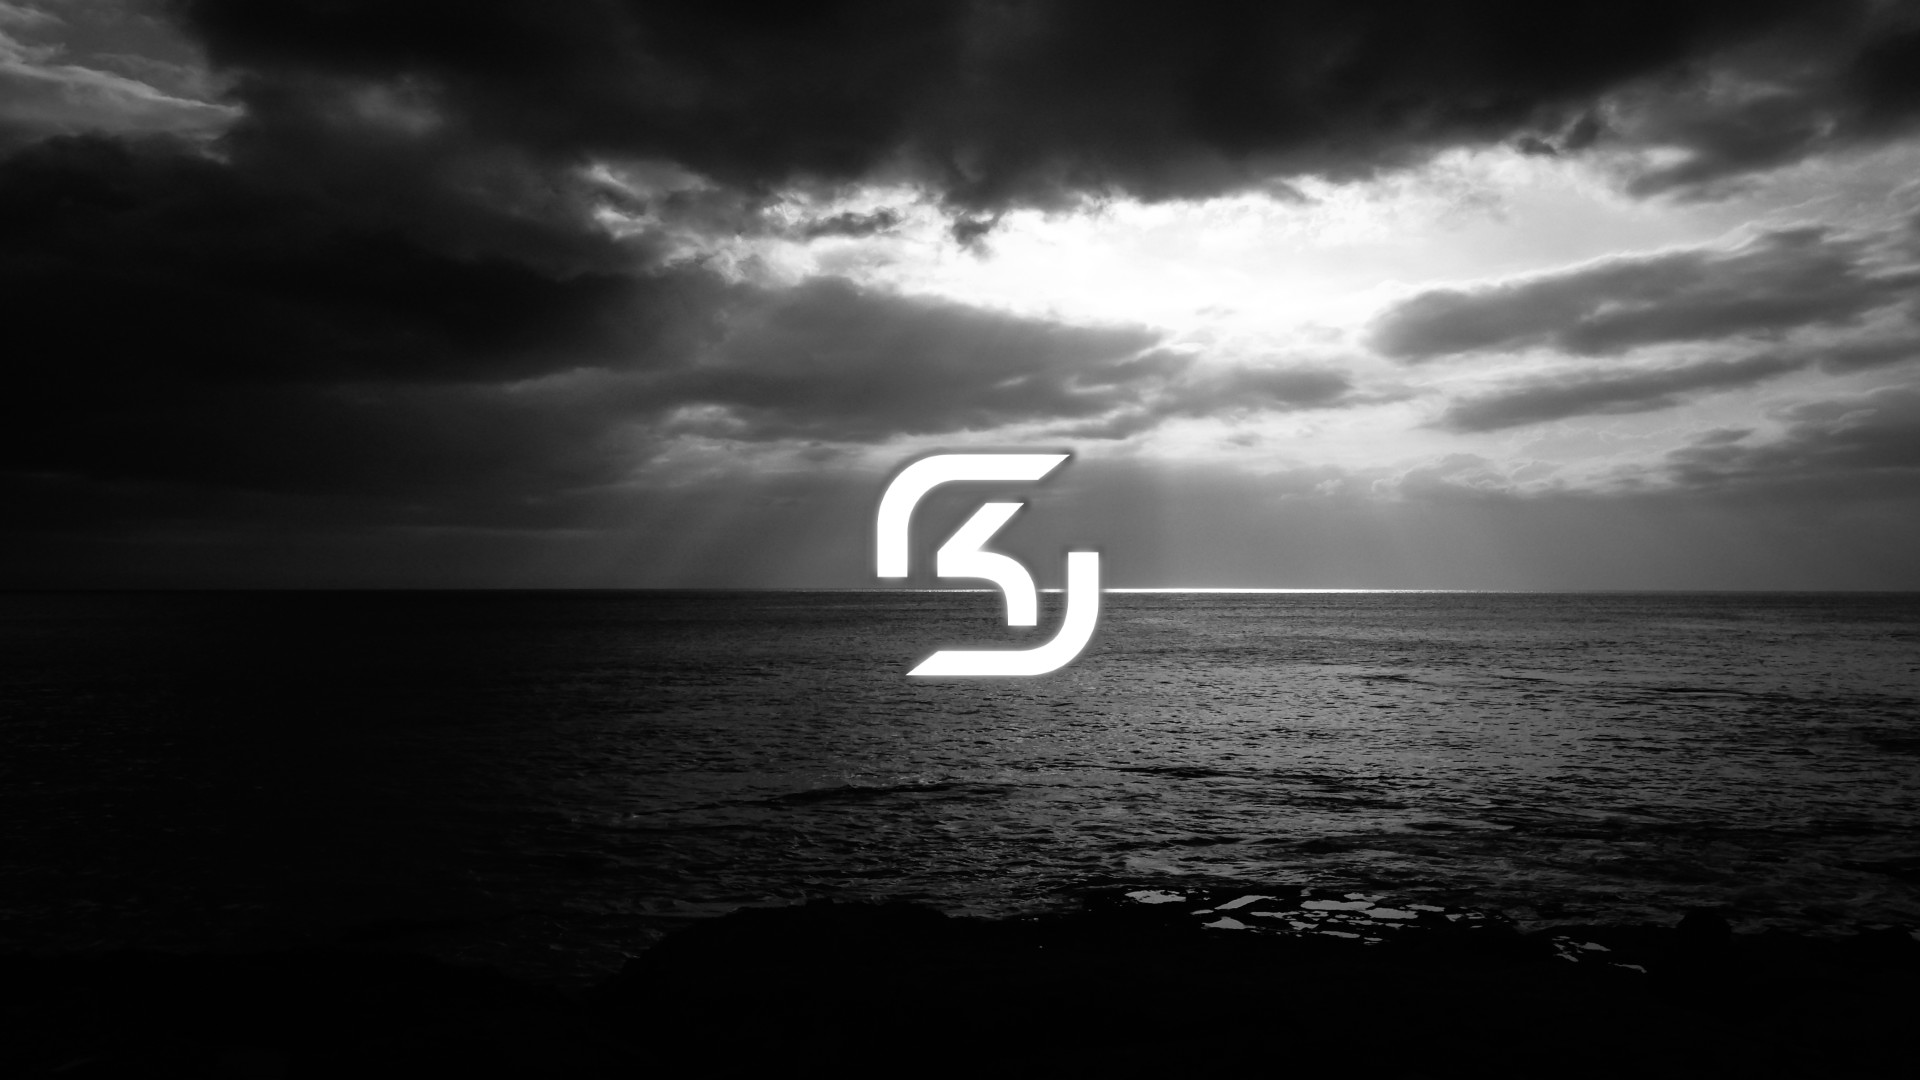 SK Gaming Wallpaper 1920 x 1080 Need #iPhone S #Plus #